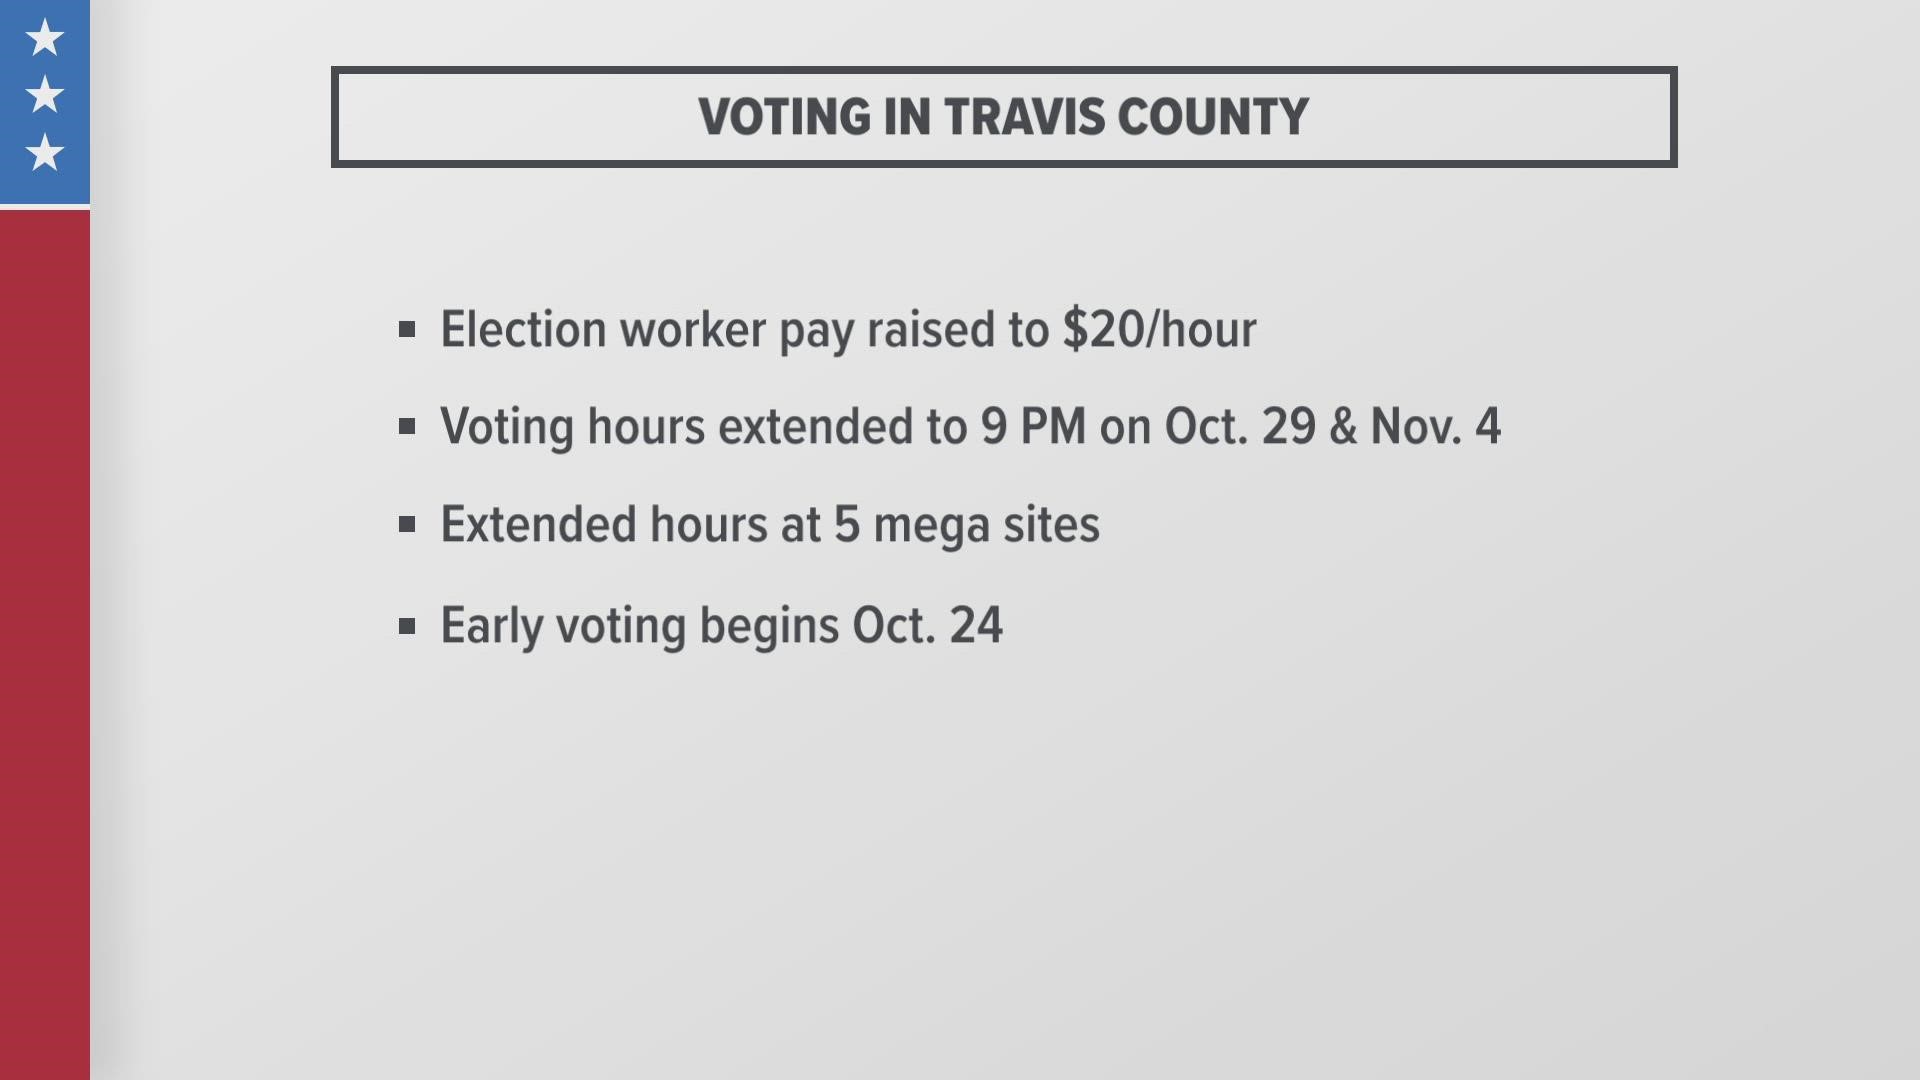 Travis County commissioners voted Tuesday to extend early voting hours and raise election workers' pay.